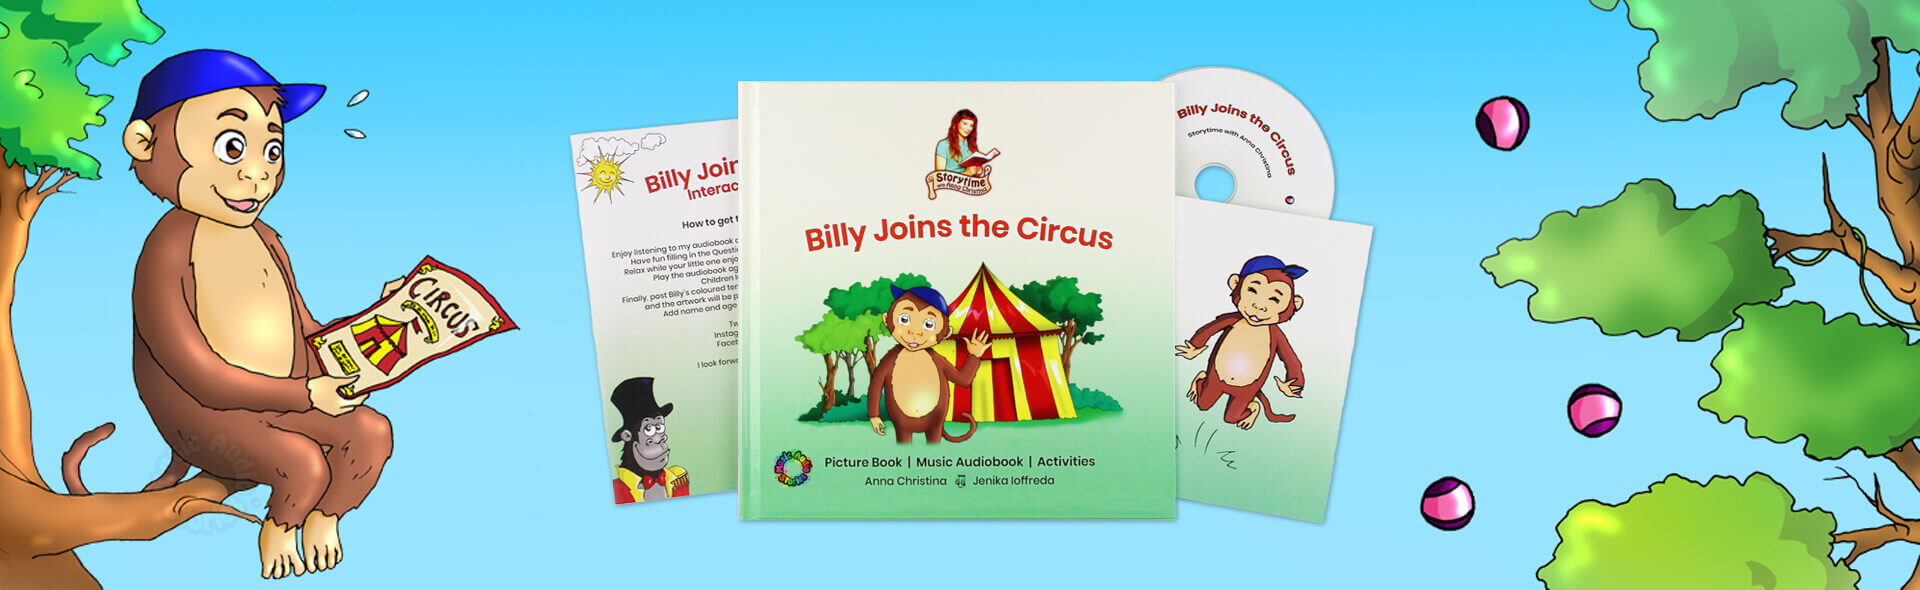 Billy Joins the Circus picture book